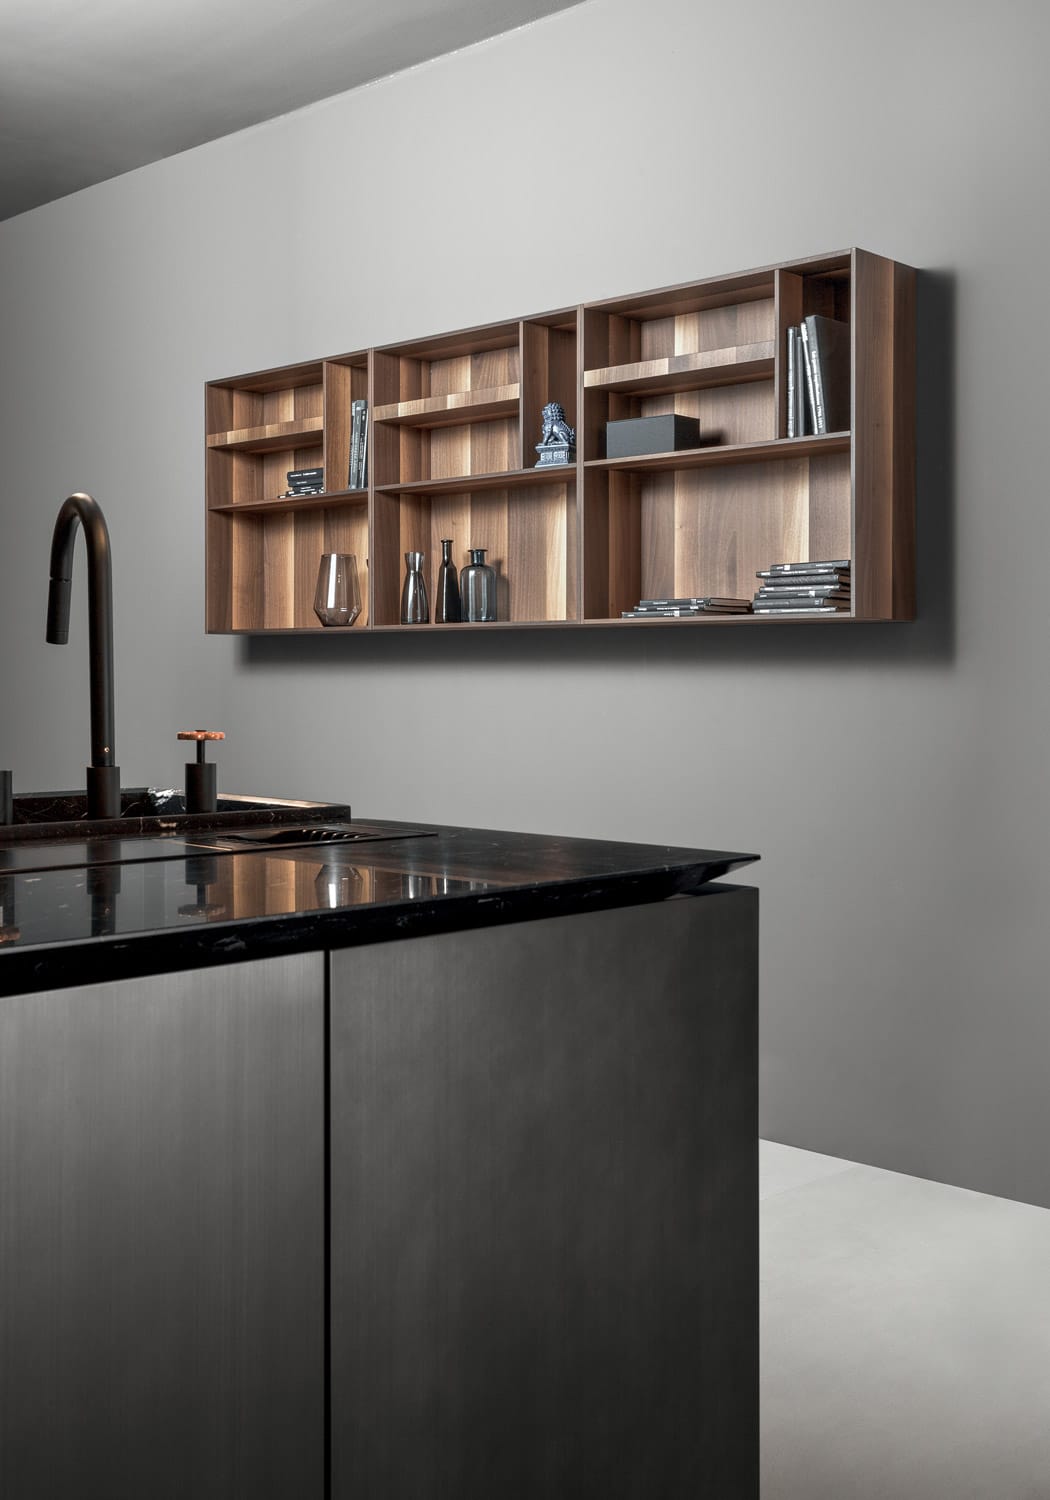 The open shelves in 12mm-thick Smoked Walnut are a welcoming, warm, and sophisticated accent that completes the kitchen design.